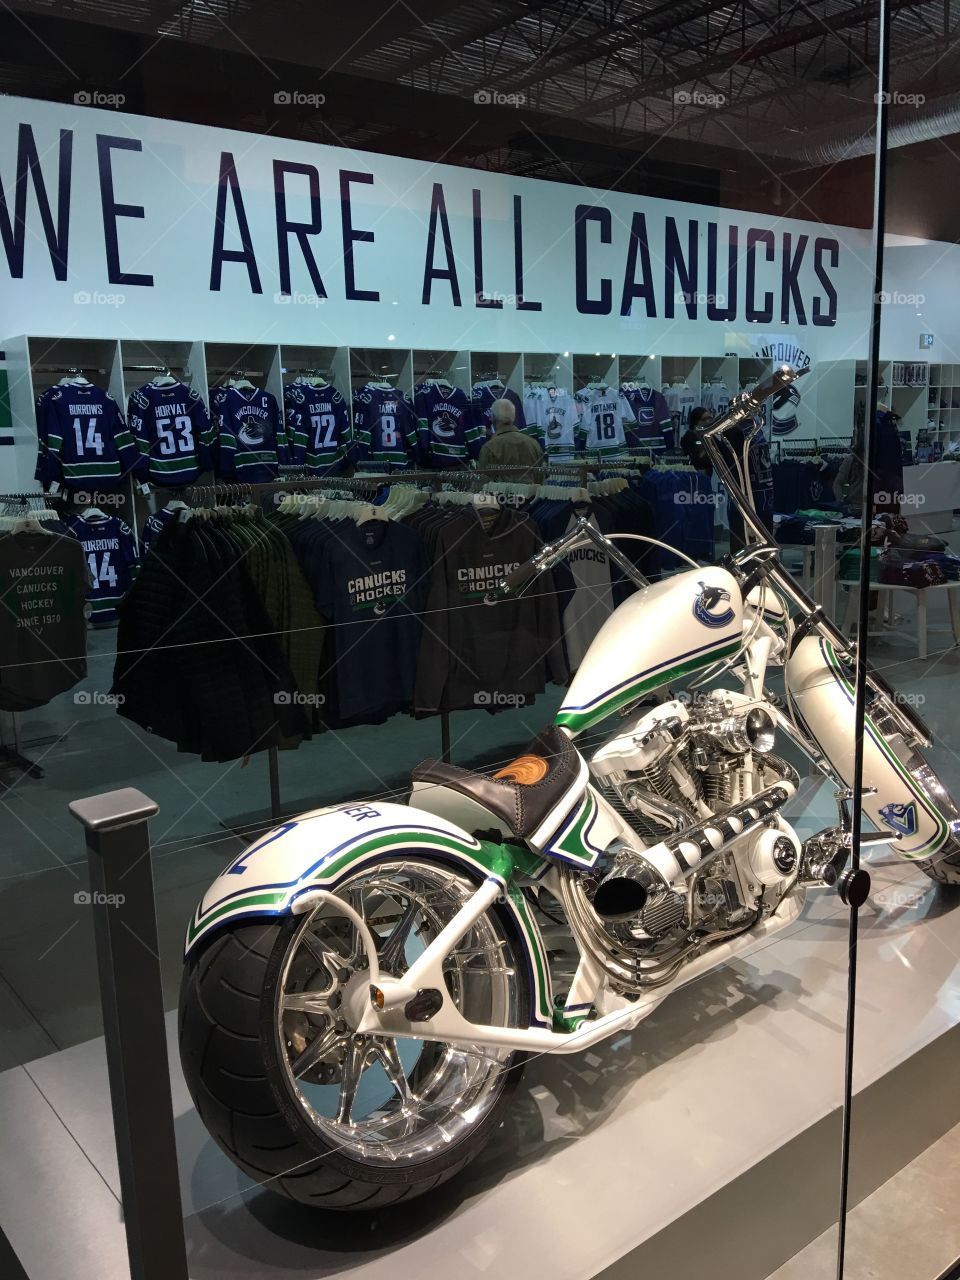 Canucks motorcycle 